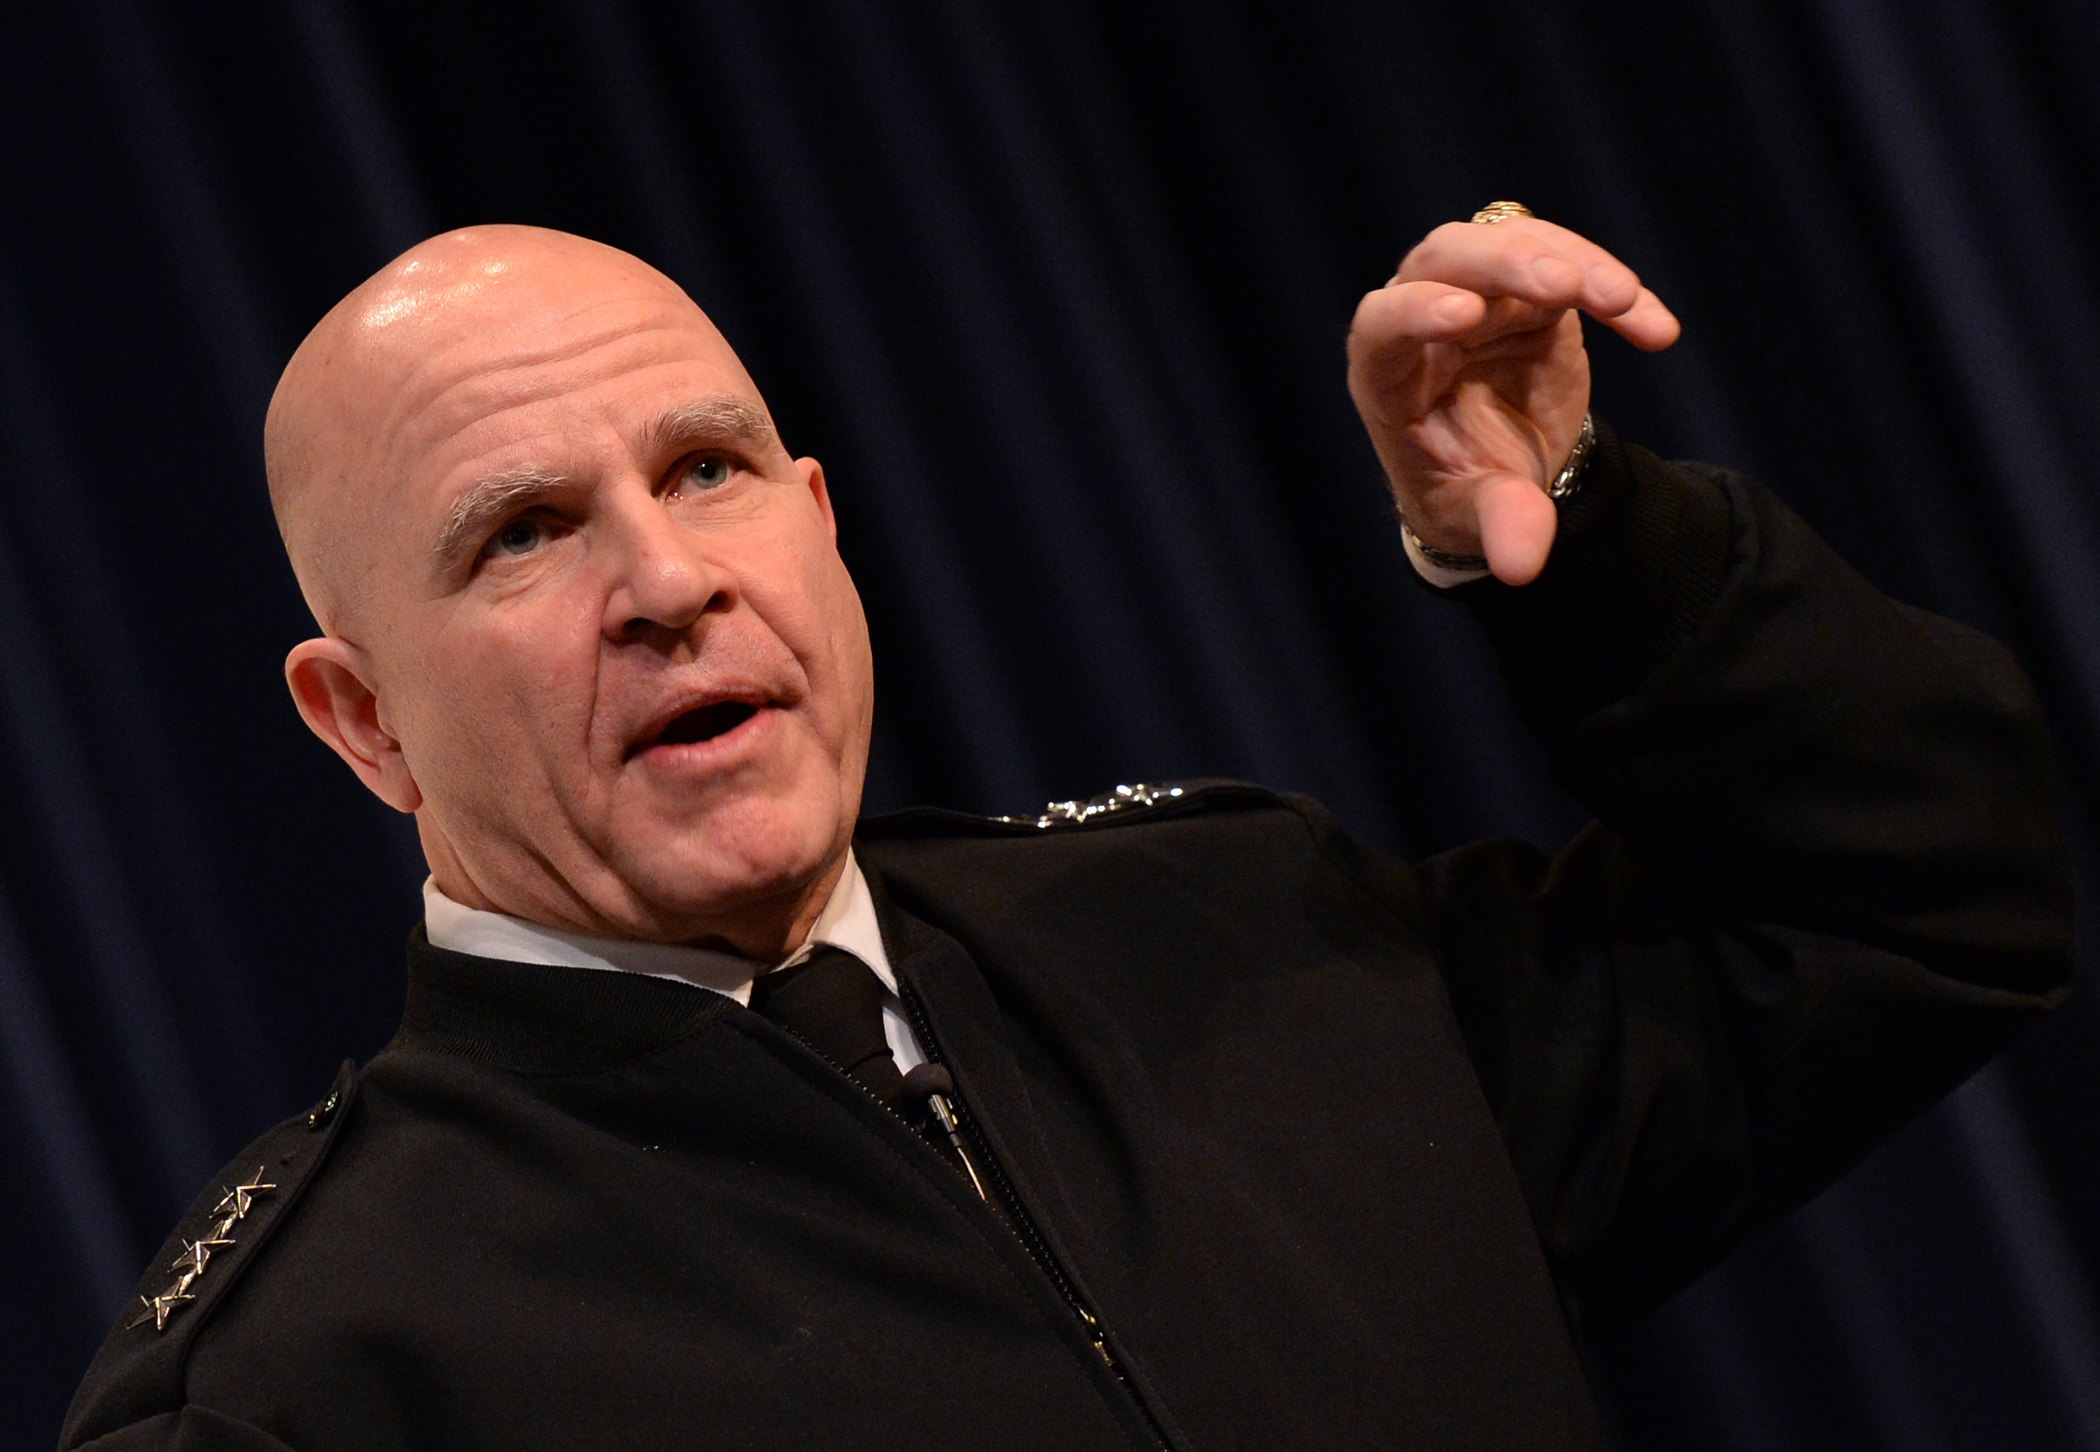 2016-03-22 00:00:00 epa05805854 A handout photo made available by by the Defense Video Imagery Distribution System (DVIDS) on 20 February 2017 shows Lt. Gen. H.R. McMaster, director, Army Capabilities Integration Center, deputy-commanding general, Futures, U.S. Army Training and Doctrine Command, speaking to students, staff, and faculty during a visit to U.S. Naval War (NWC) College in Newport, R.I., USA, 22 March 2016. US President Donald J. Trump announced on 20 February 2017 Lt. Gen. H.R. McMaster would serve as national security advisor. EPA/Chief Mass Communication Specialist James E. Foehl / HO Released by CDR Barbara Mertz, Public Affairs Officer, U.S. Naval War College, (401)841-2220, pao@usnwc.edu via DVIDS HANDOUT EDITORIAL USE ONLY/NO SALES